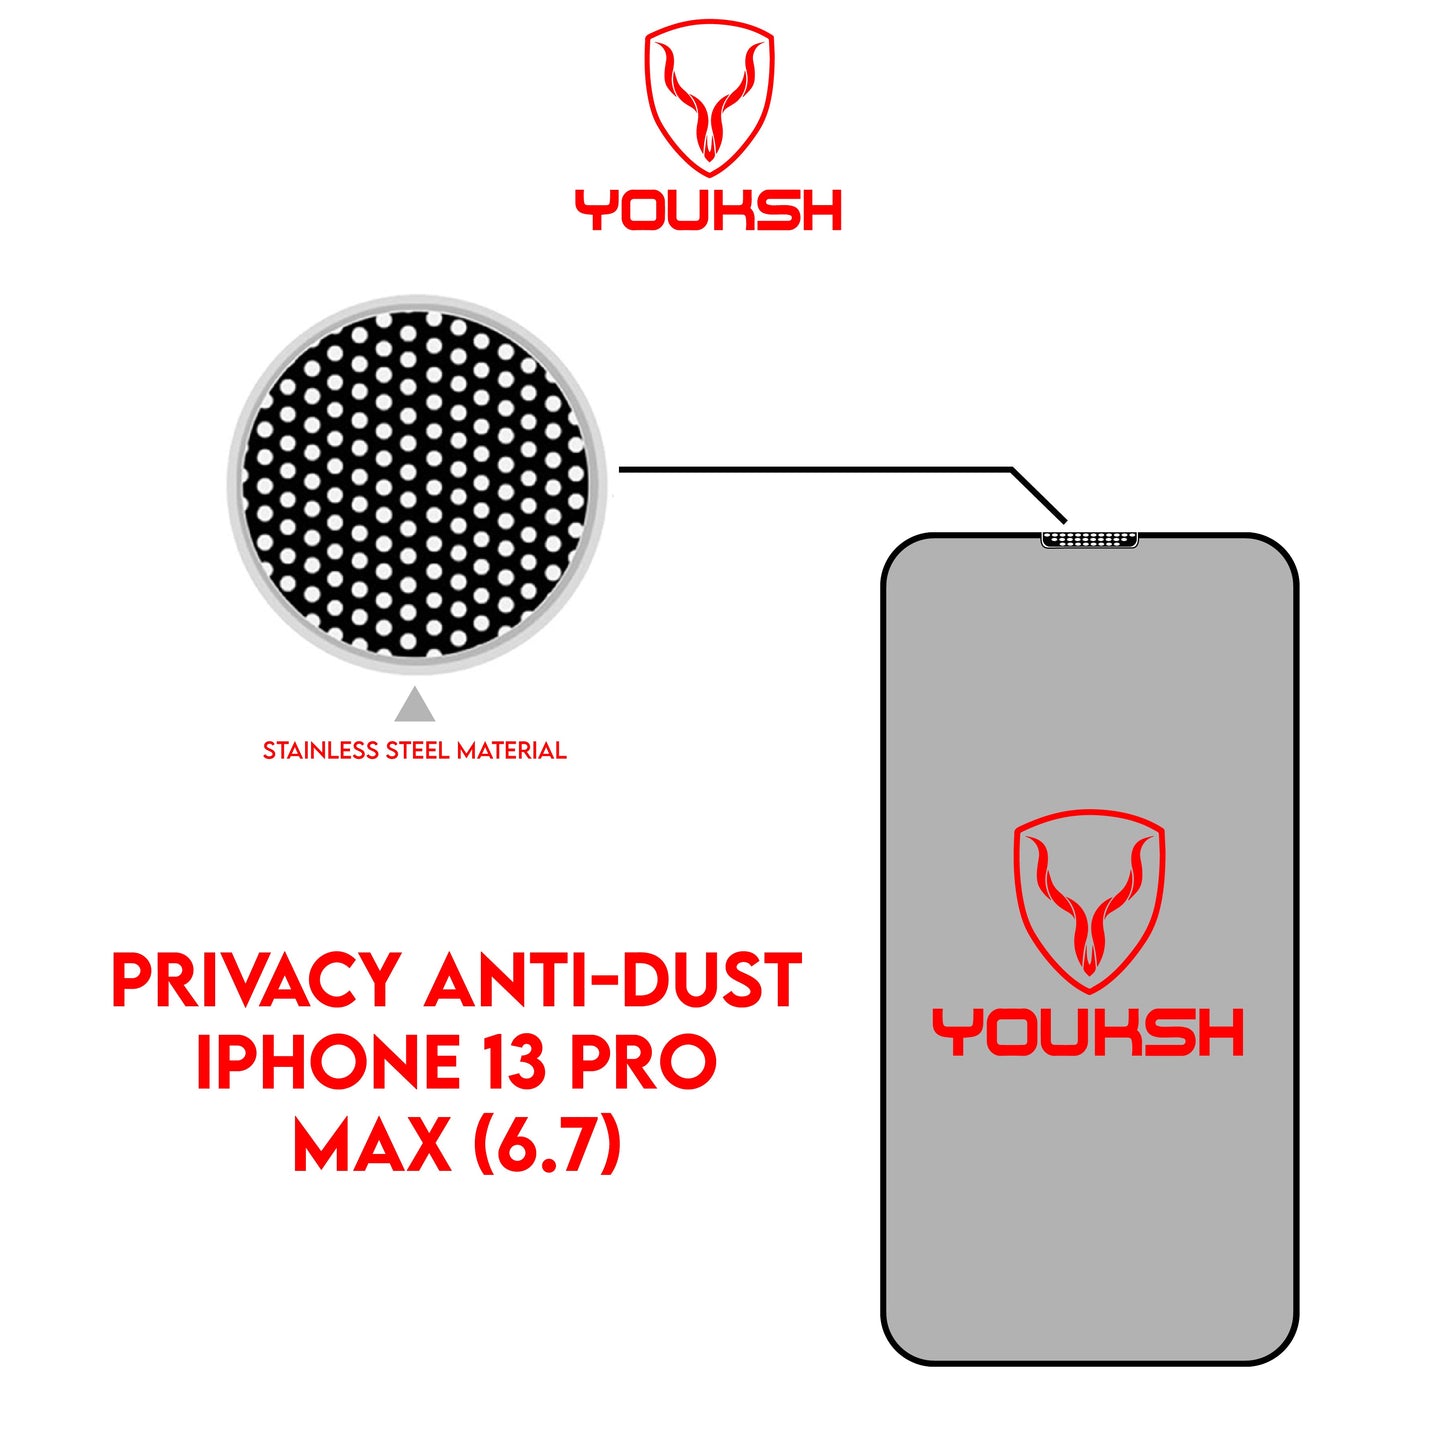 YOUKSH Apple iPhone 13 Pro Max (6.7) - YOUKSH Privacy Anti Dust Glass Protector - With YOUKSH Installation kit.